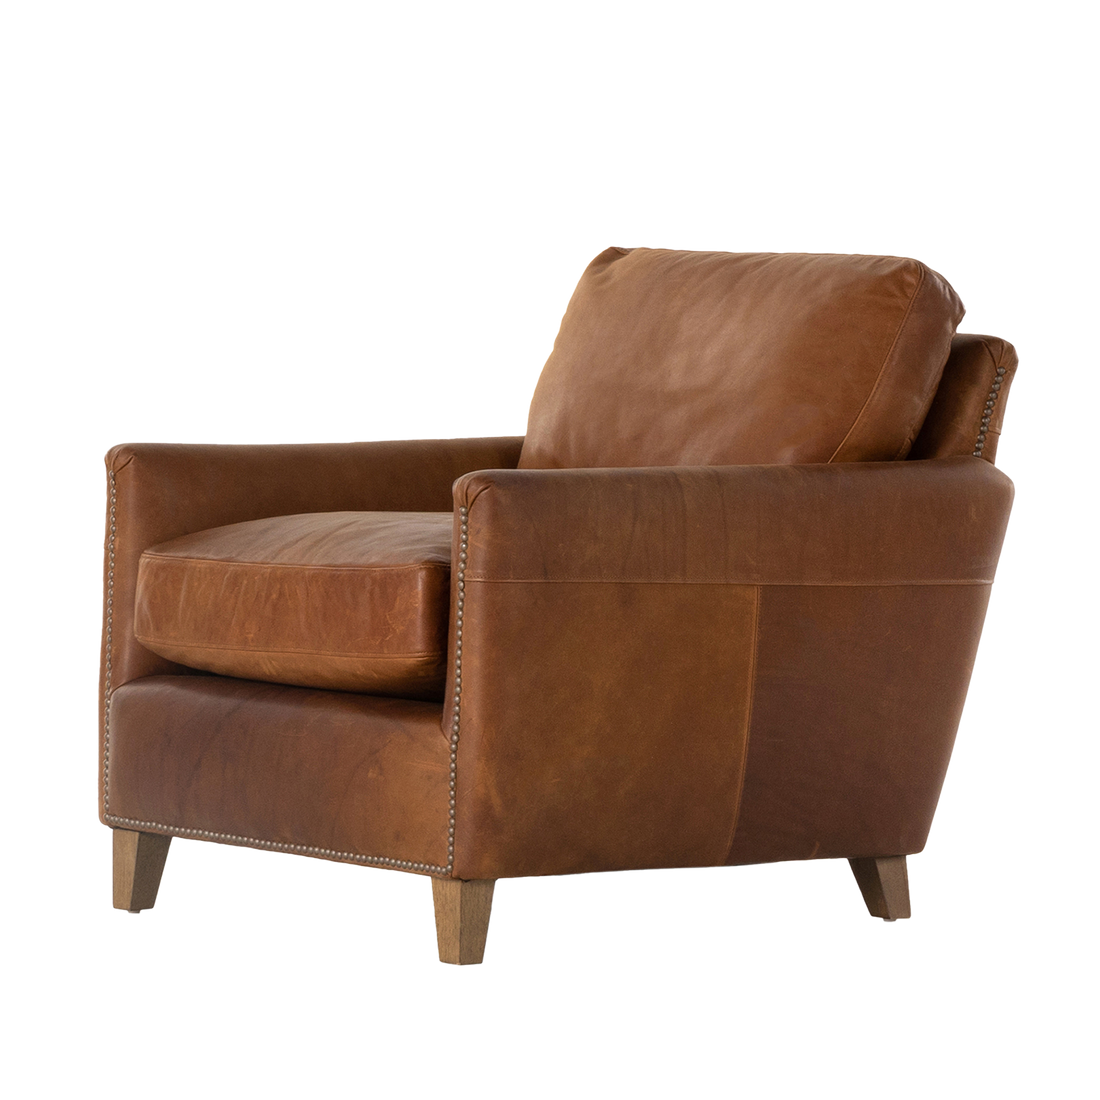 Chet Leather Chair